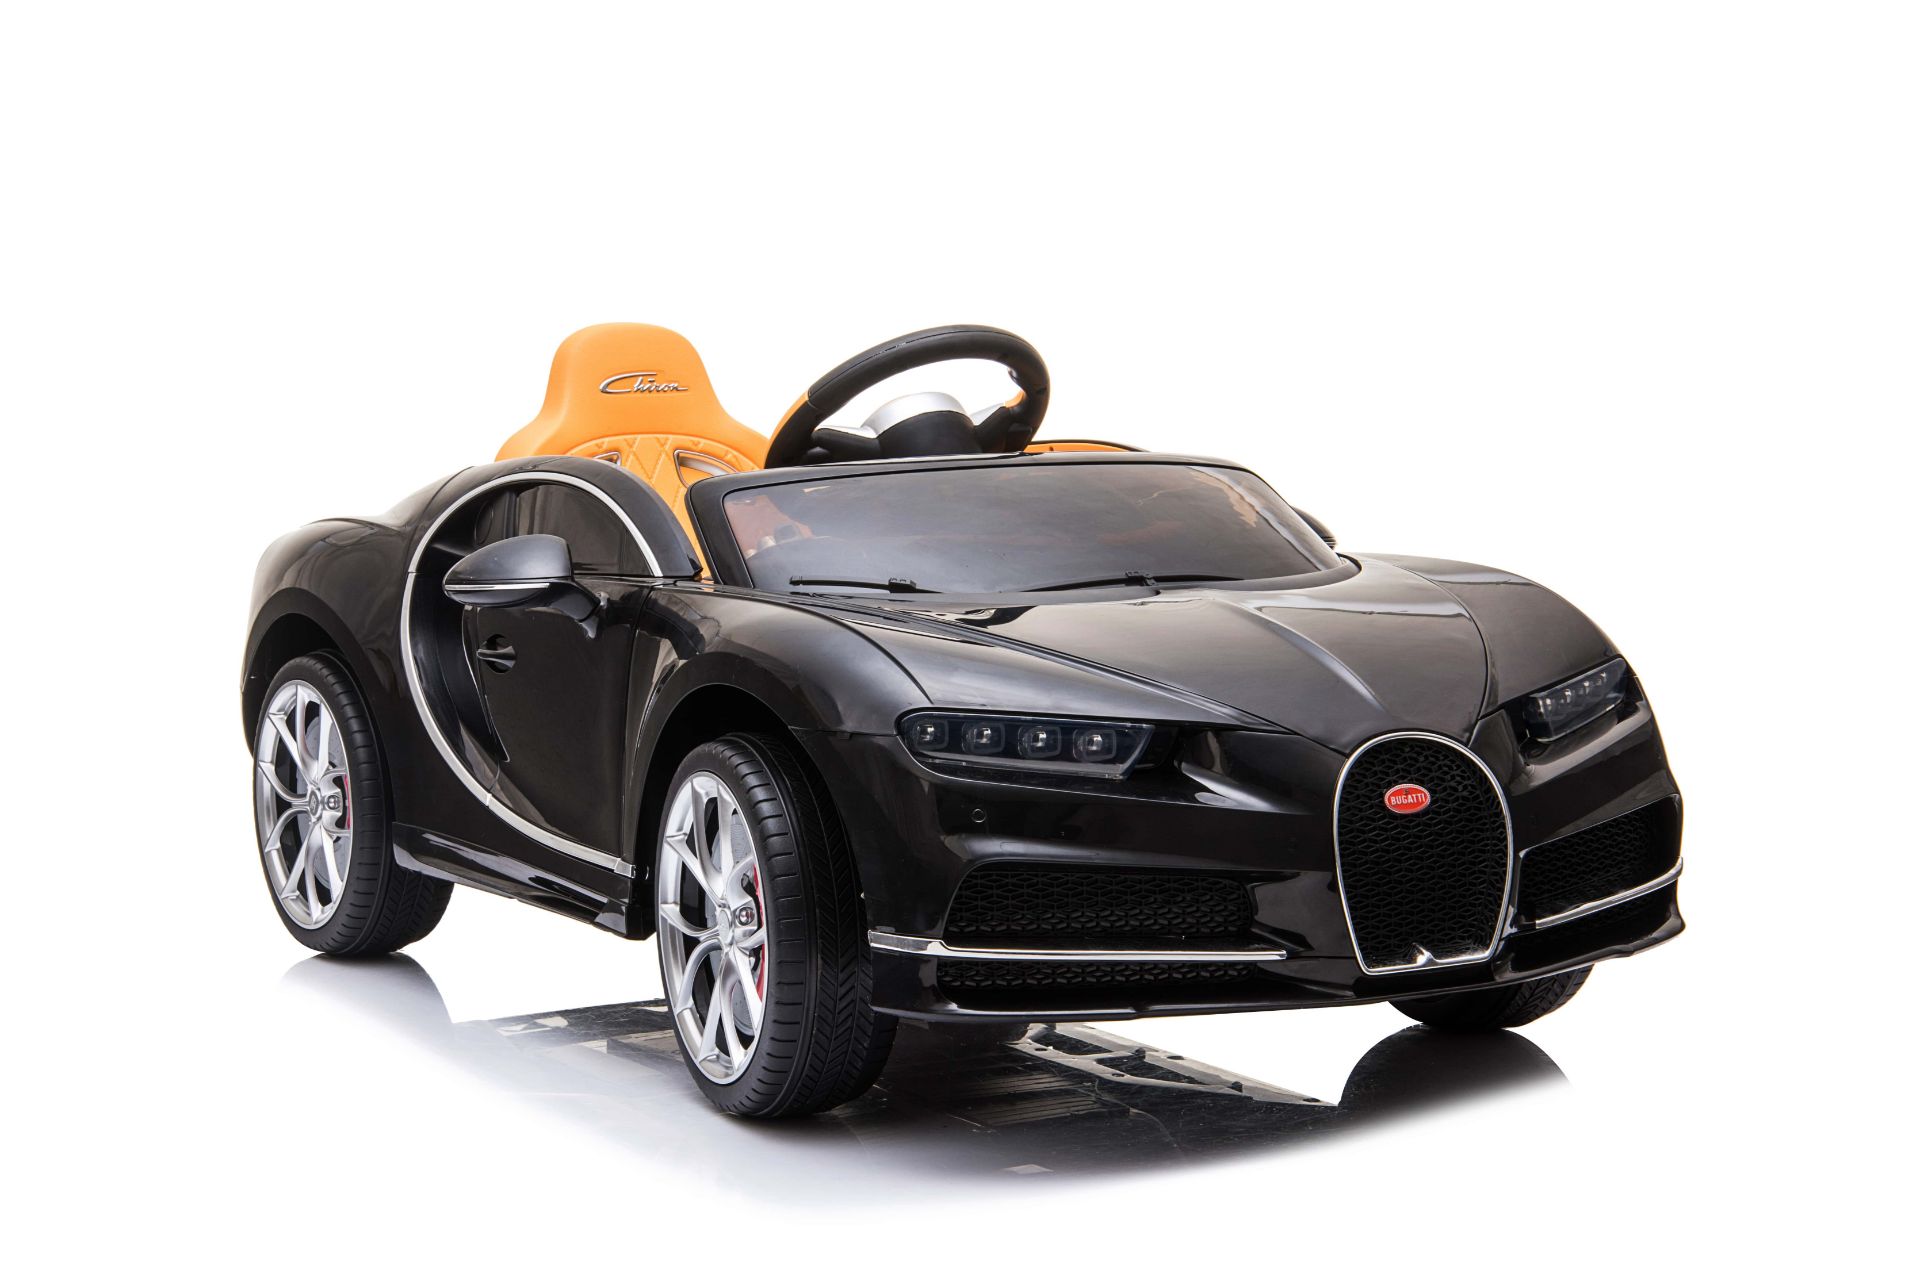 RIDE ON FULLY LICENCED BUGATTI CHIRON 12V WITH PARENTAL REMOTE CONTROL - BLACK - Image 2 of 7